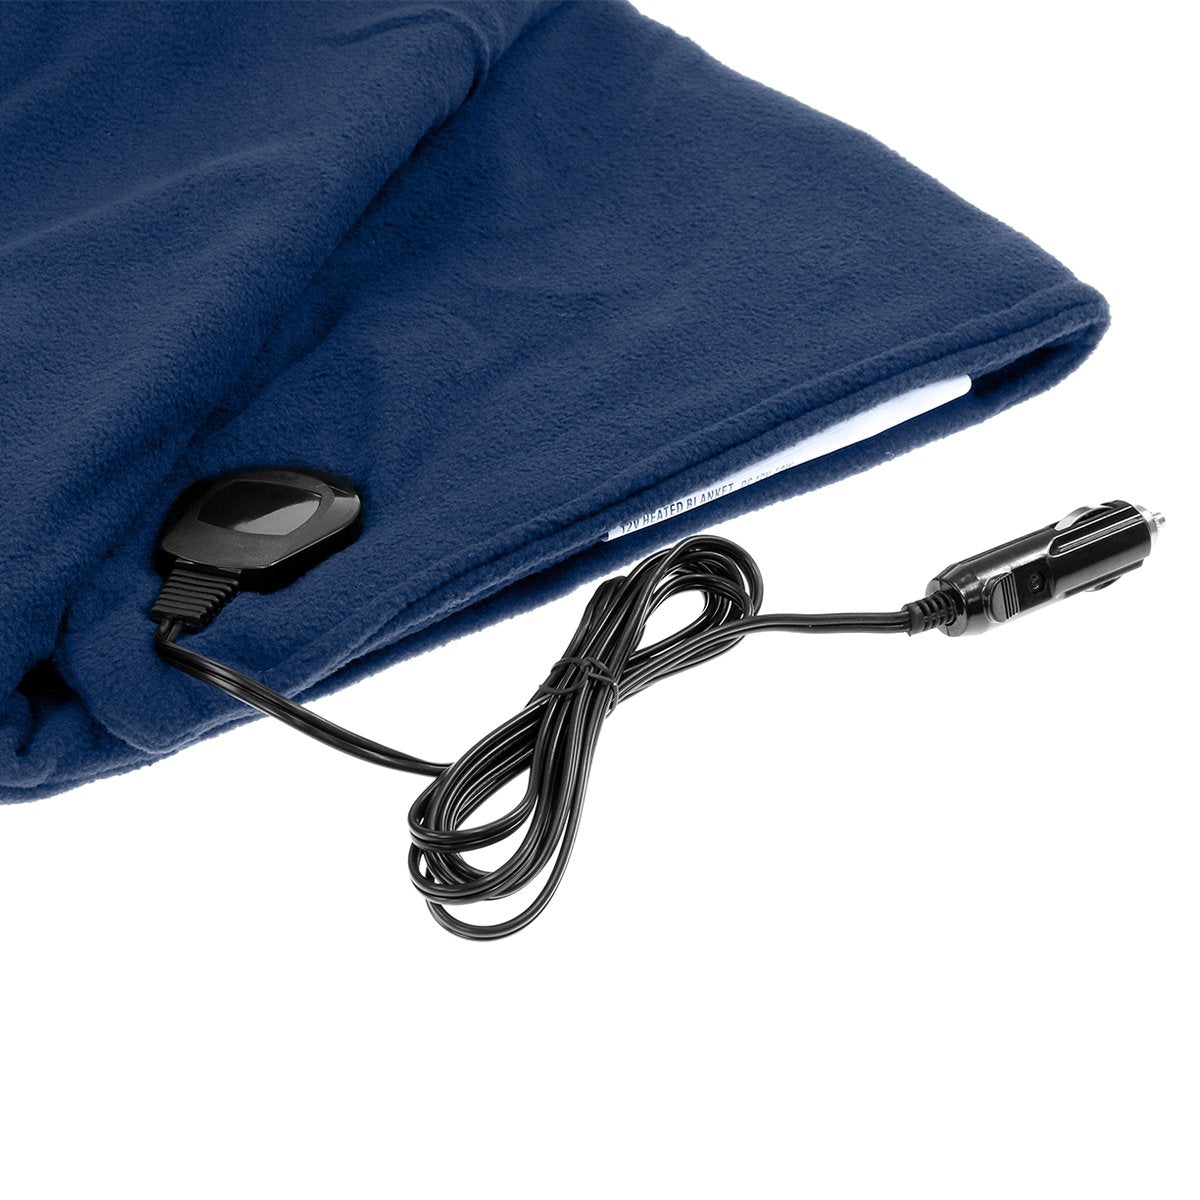 Laura Hill Heated Electric Car Blanket 150x110cm 12v - Navy Blue-Electric Throw Blanket-PEROZ Accessories